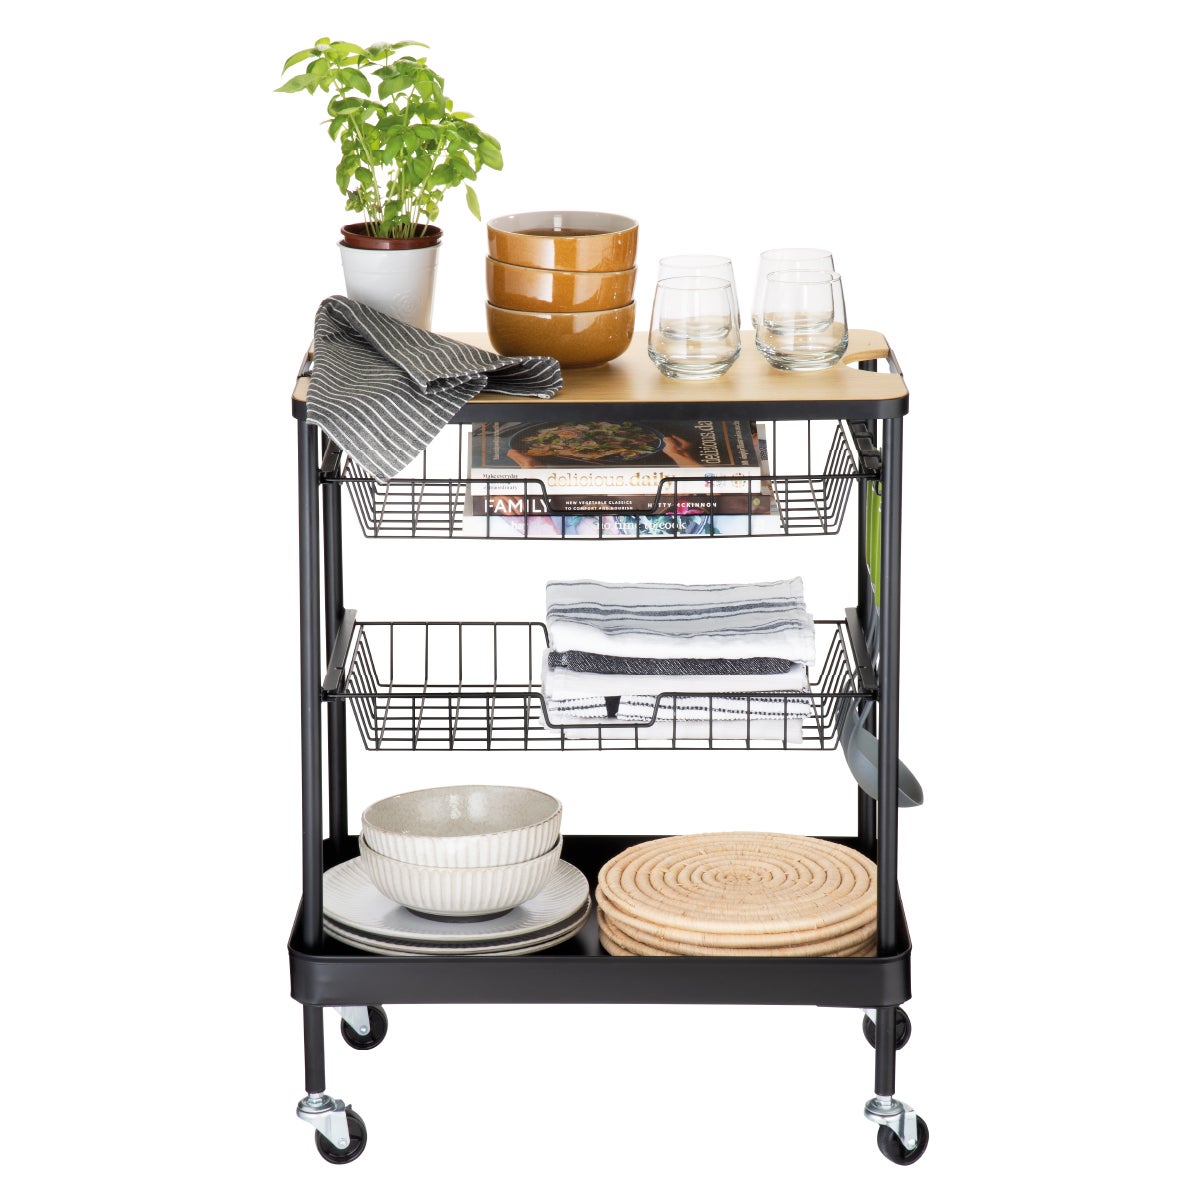 Live It 4-Tier Cart Rolling Trolley Utility Storage For Multi-Purpose - Black